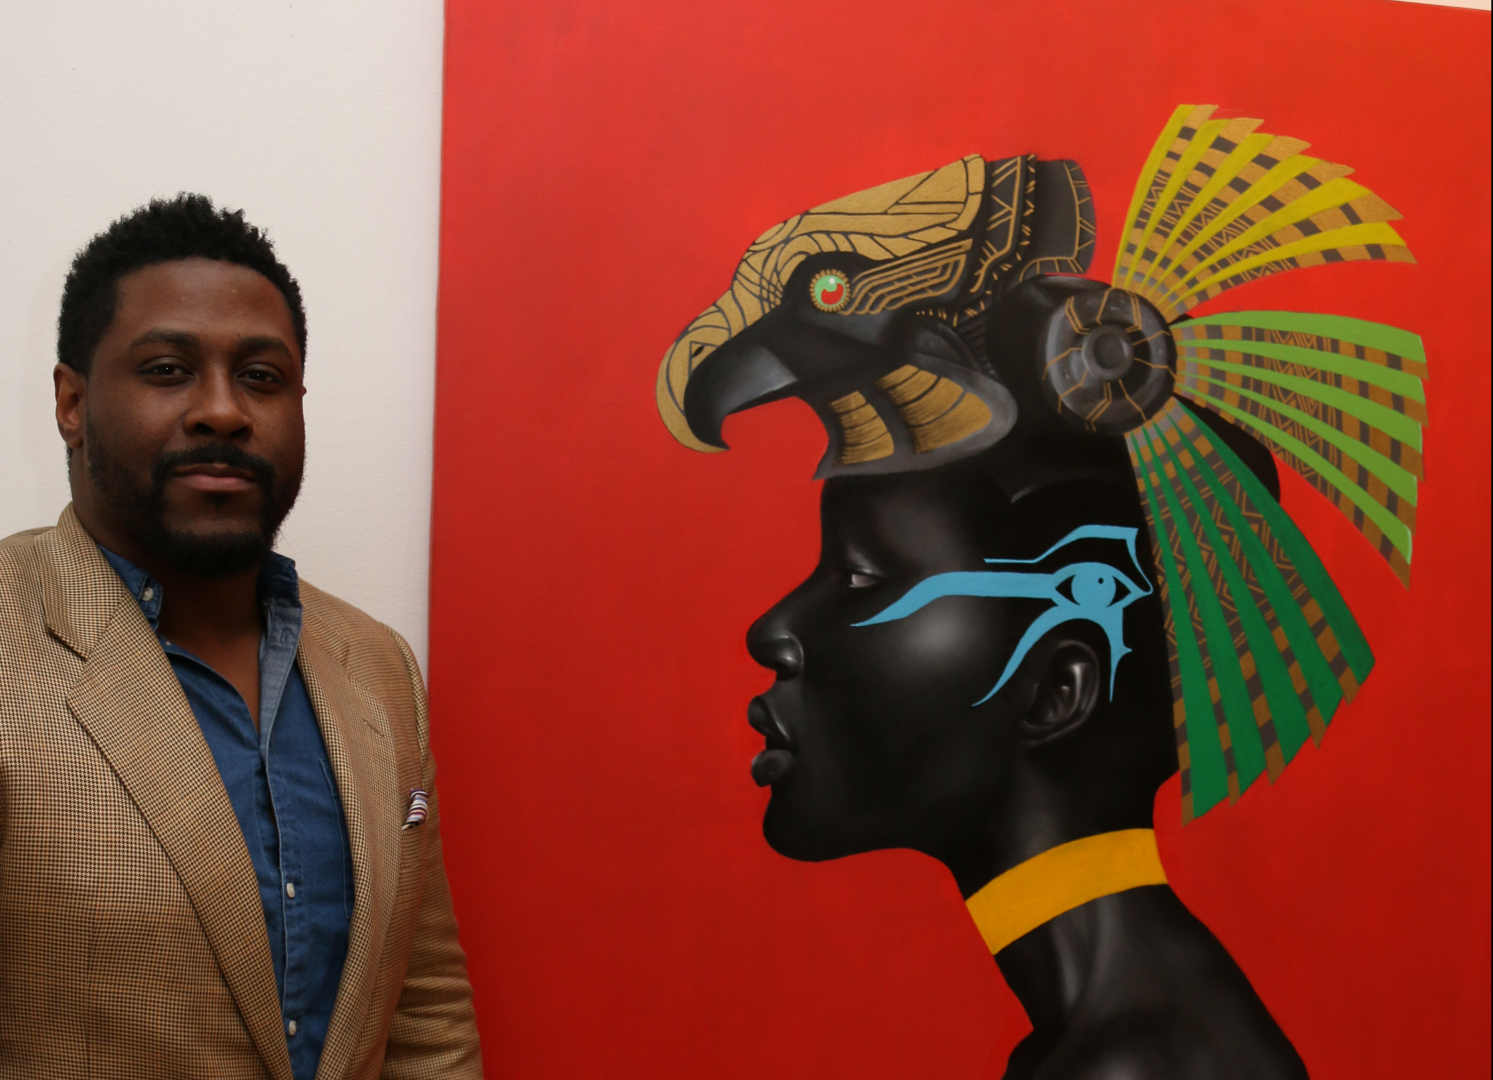 James Nelson Afro-Lution at Nych Gallery in Chicago